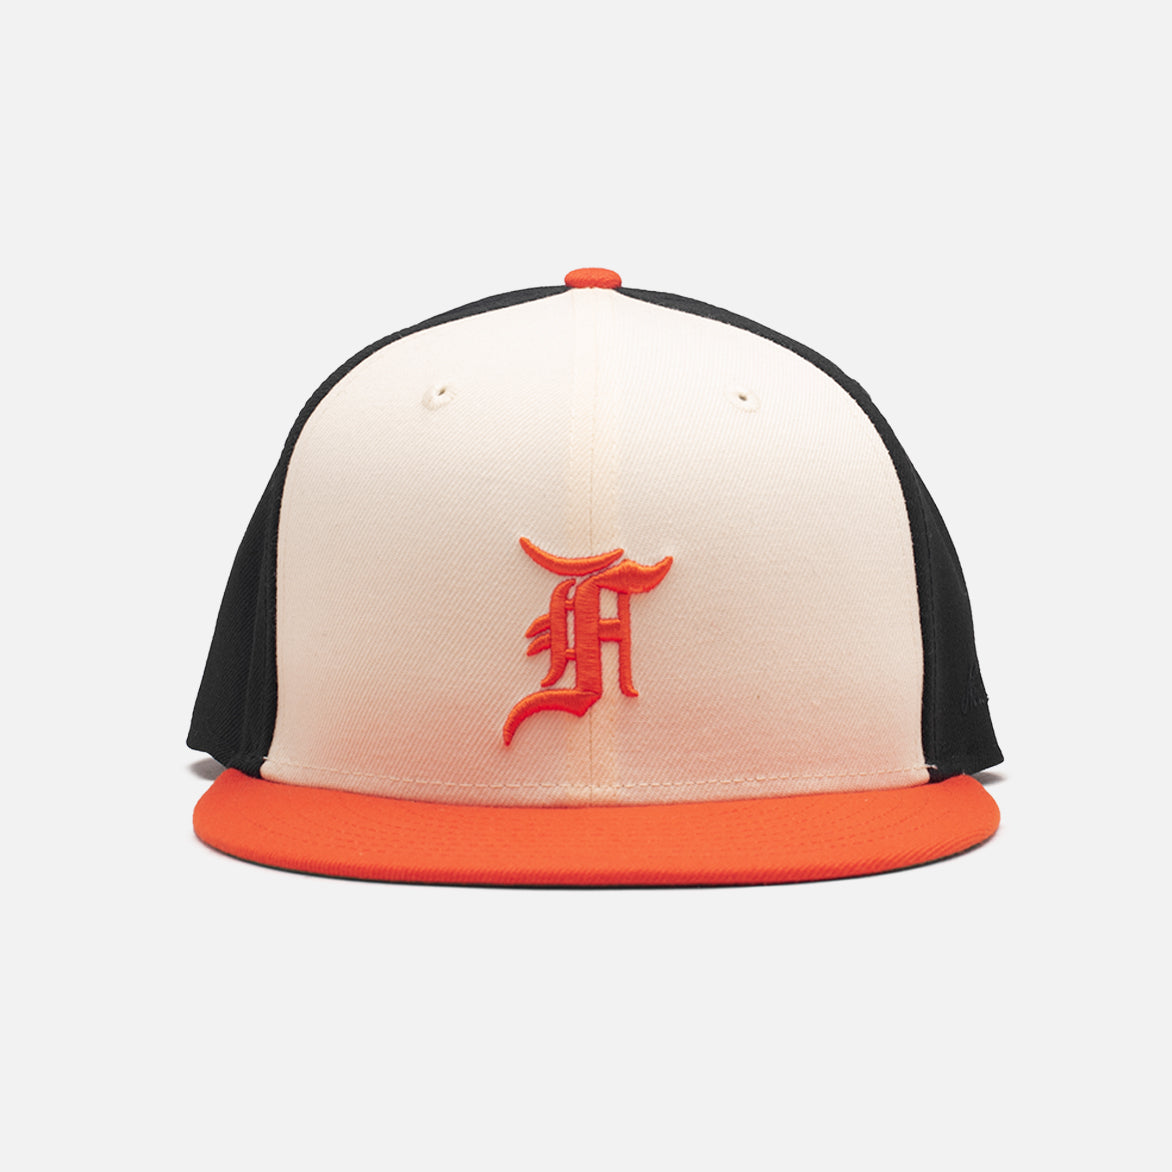 Fog x New Era 59FIFTY Fitted Cap - Orioles 7